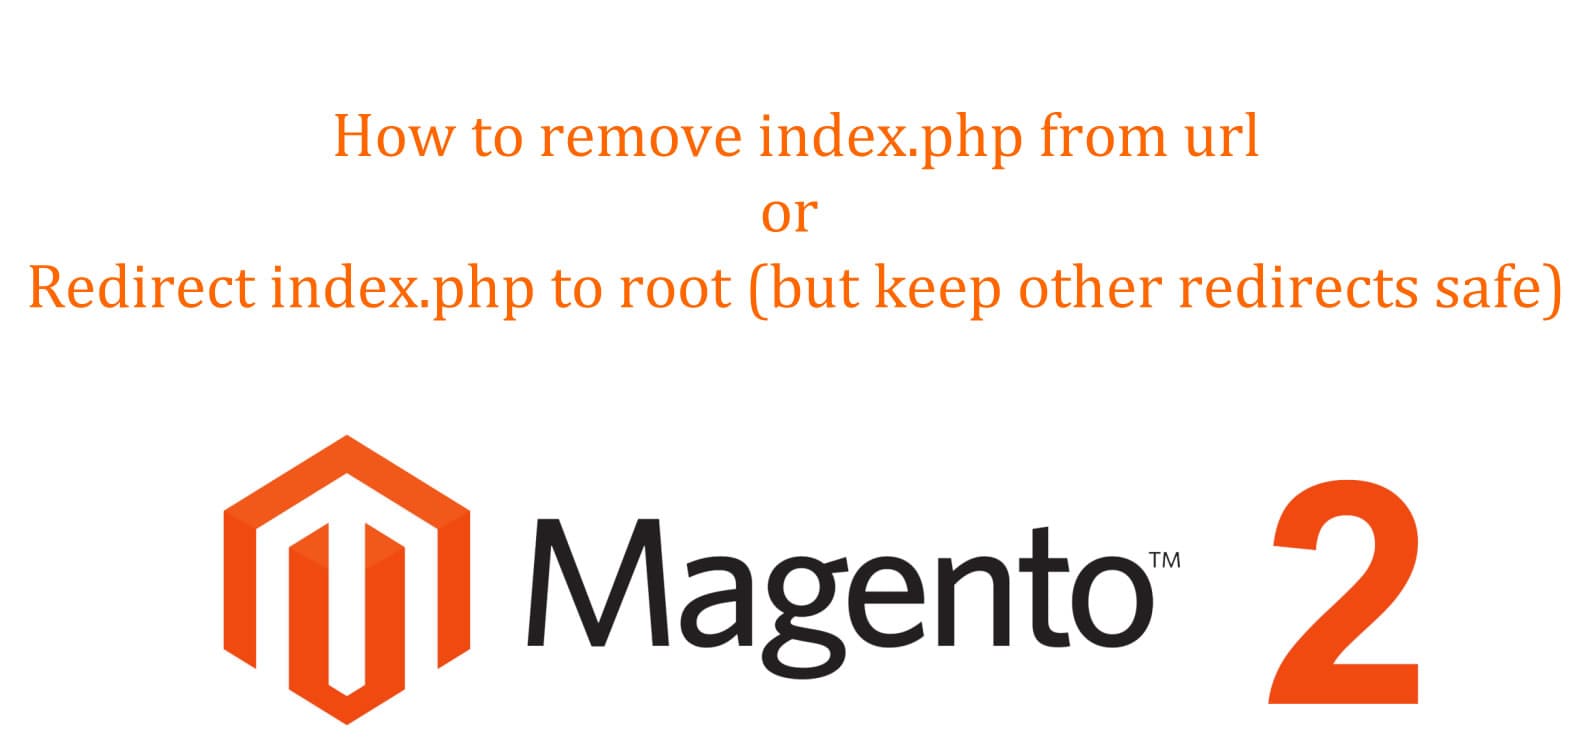 Magento 2 Remove Index.php from URLs (Redirect URLs with Index.php to URLs without it)